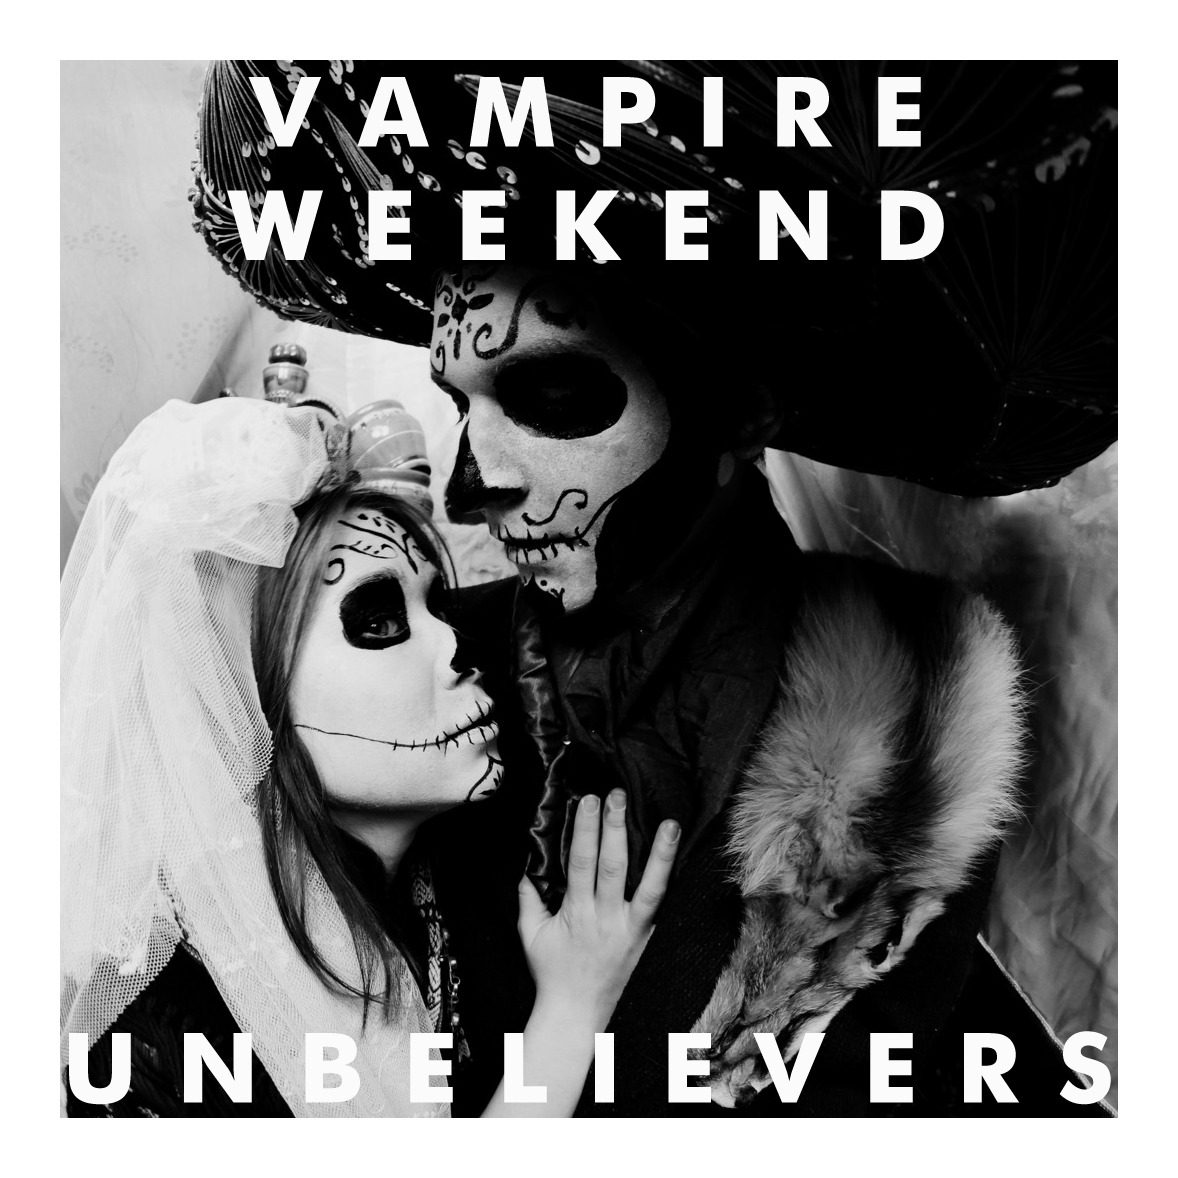 Vampire weekend only god was above us. Группа Vampire weekend. Vampire weekend Vampire weekend обложка альбома. Vampire weekend Modern Vampires of the City обложка. Vampire weekend contra обложка альбома.